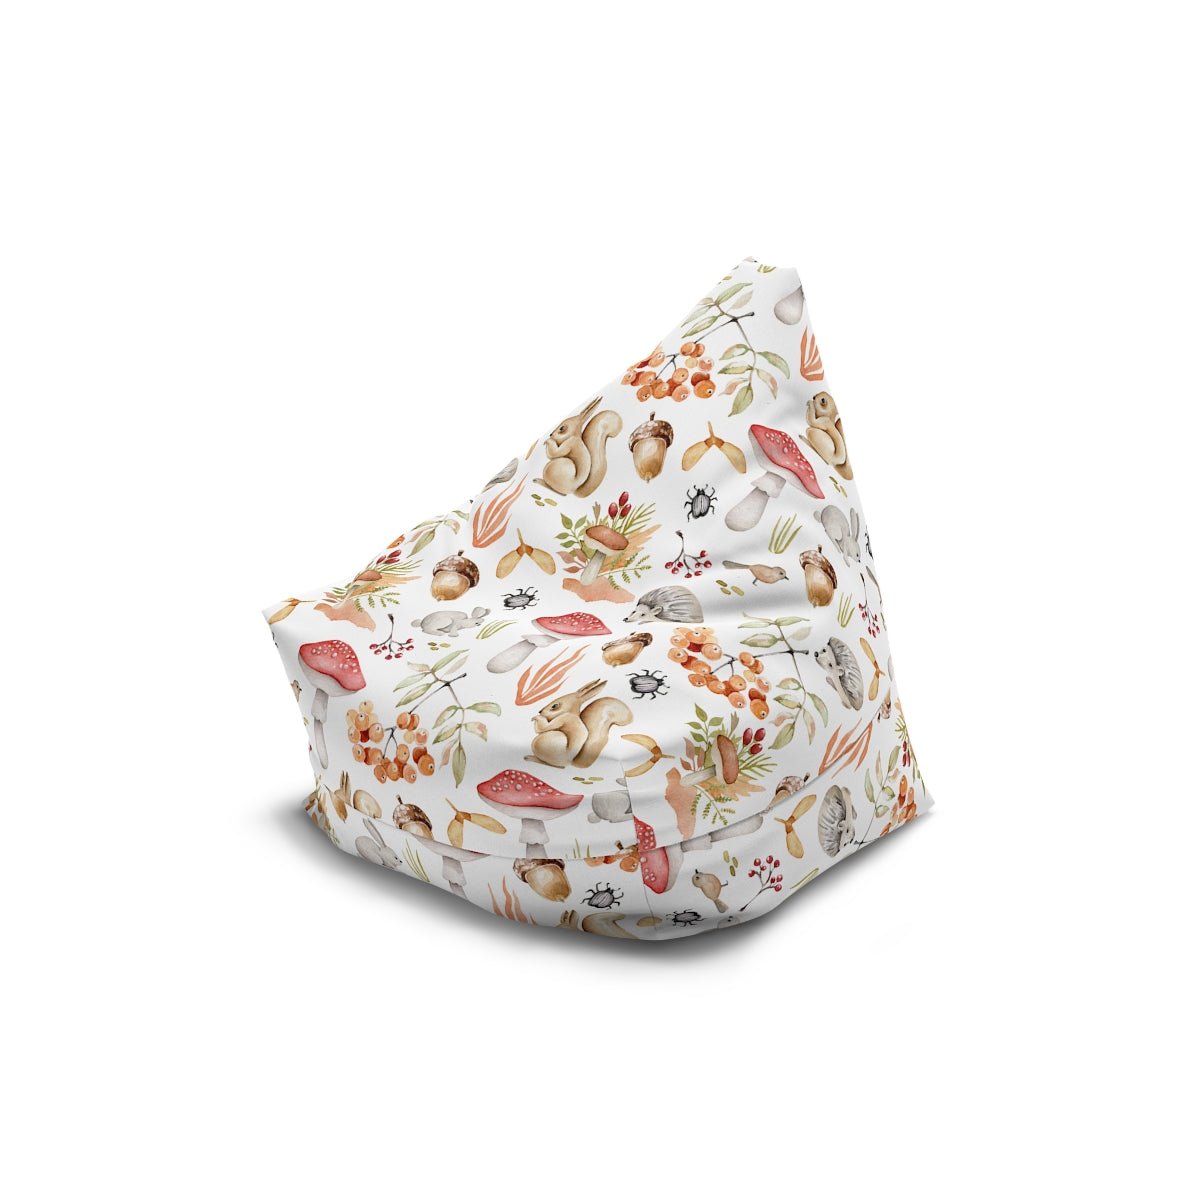 Fall Forest Animals Bean Bag Chair Cover - Puffin Lime